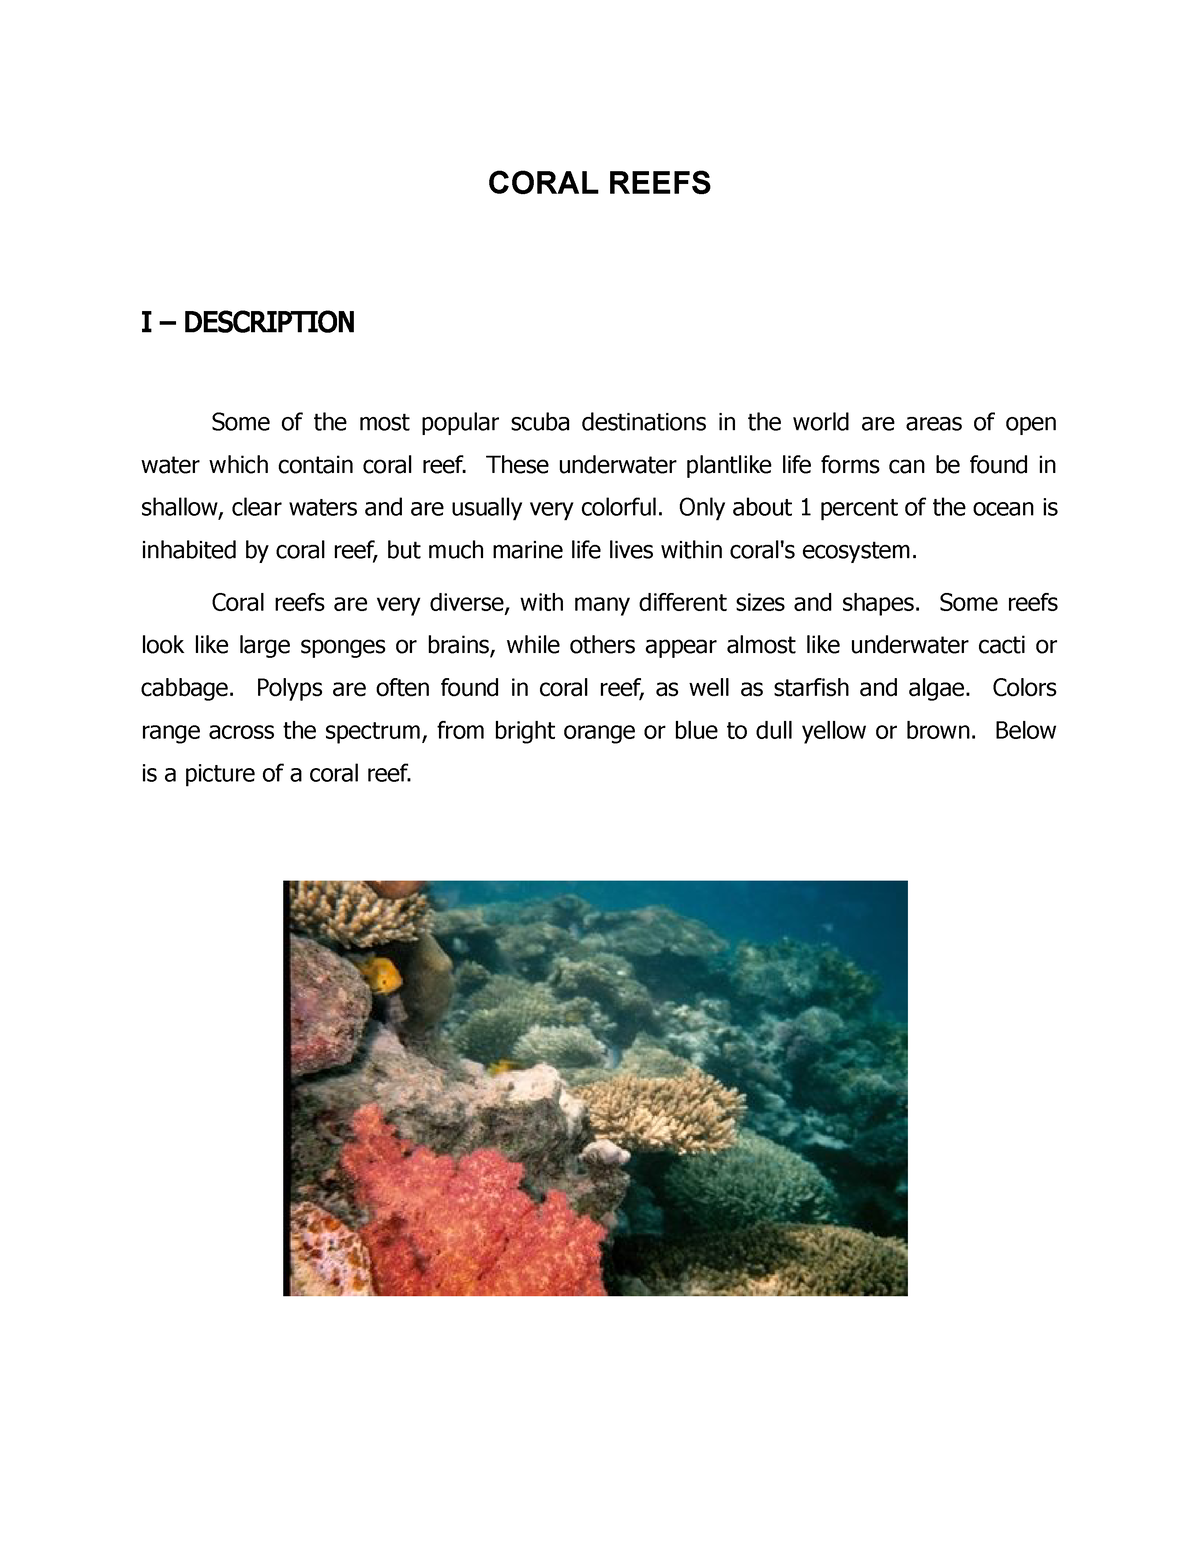 How are coral reefs formed?